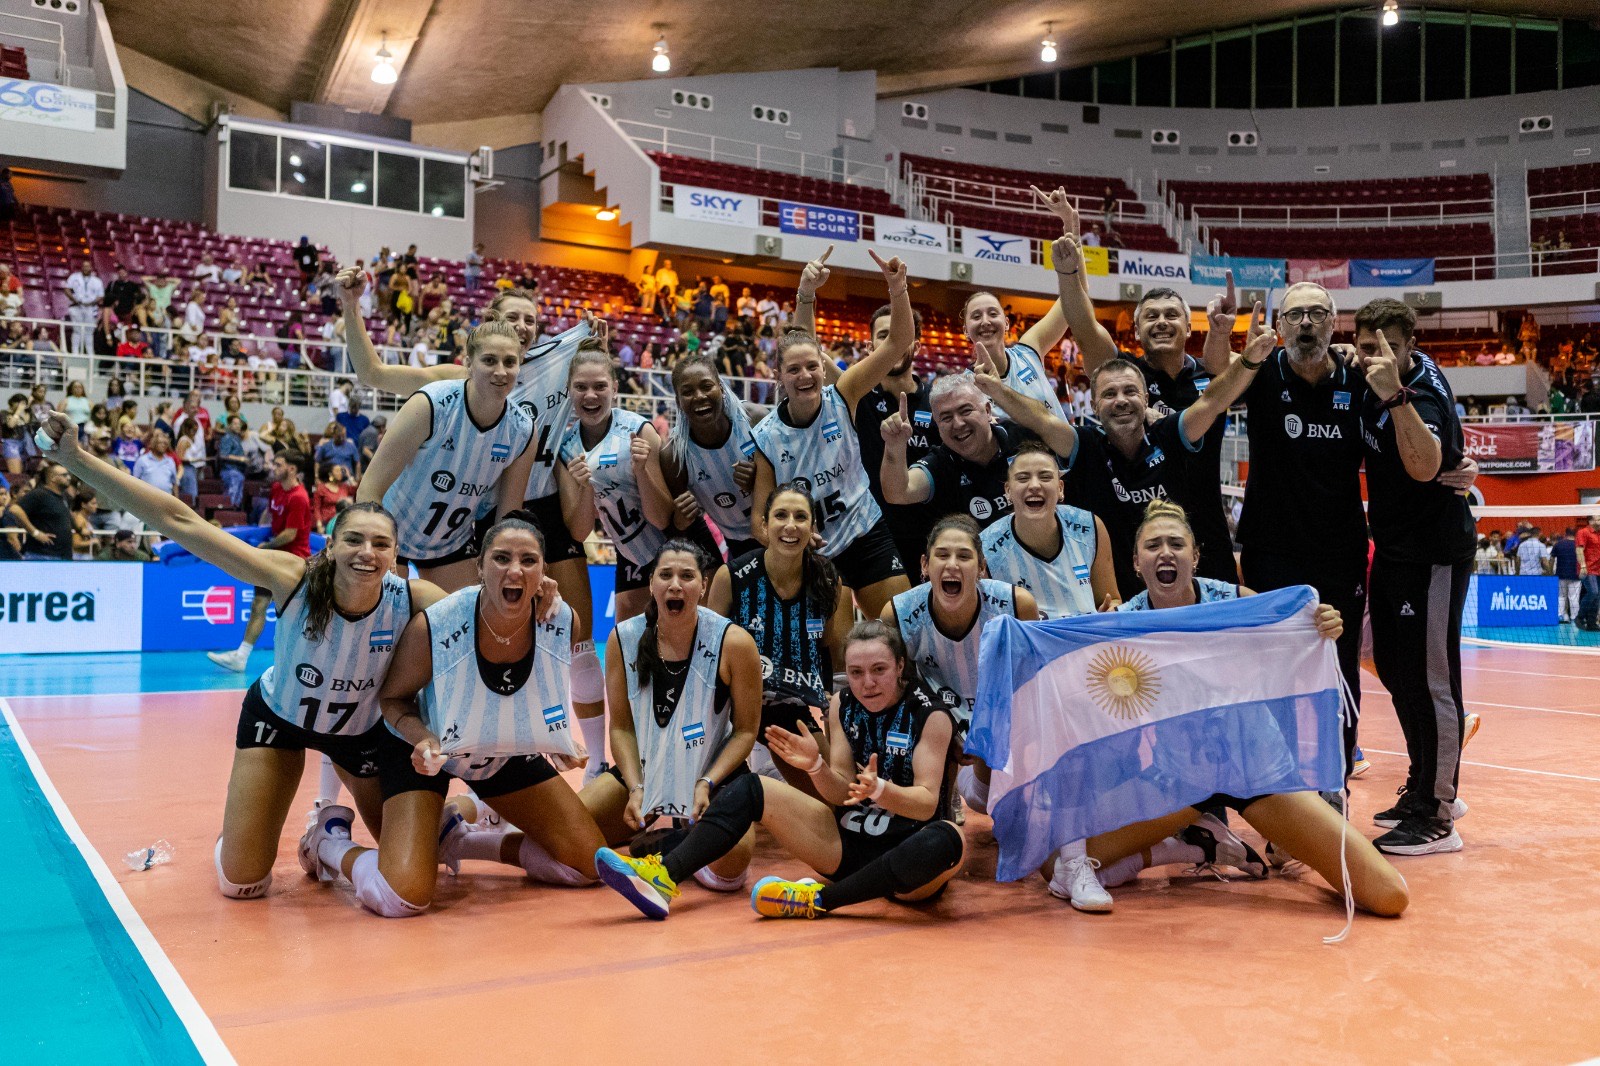 Argentina was crowned Champion of the Pan American Cup for the first time